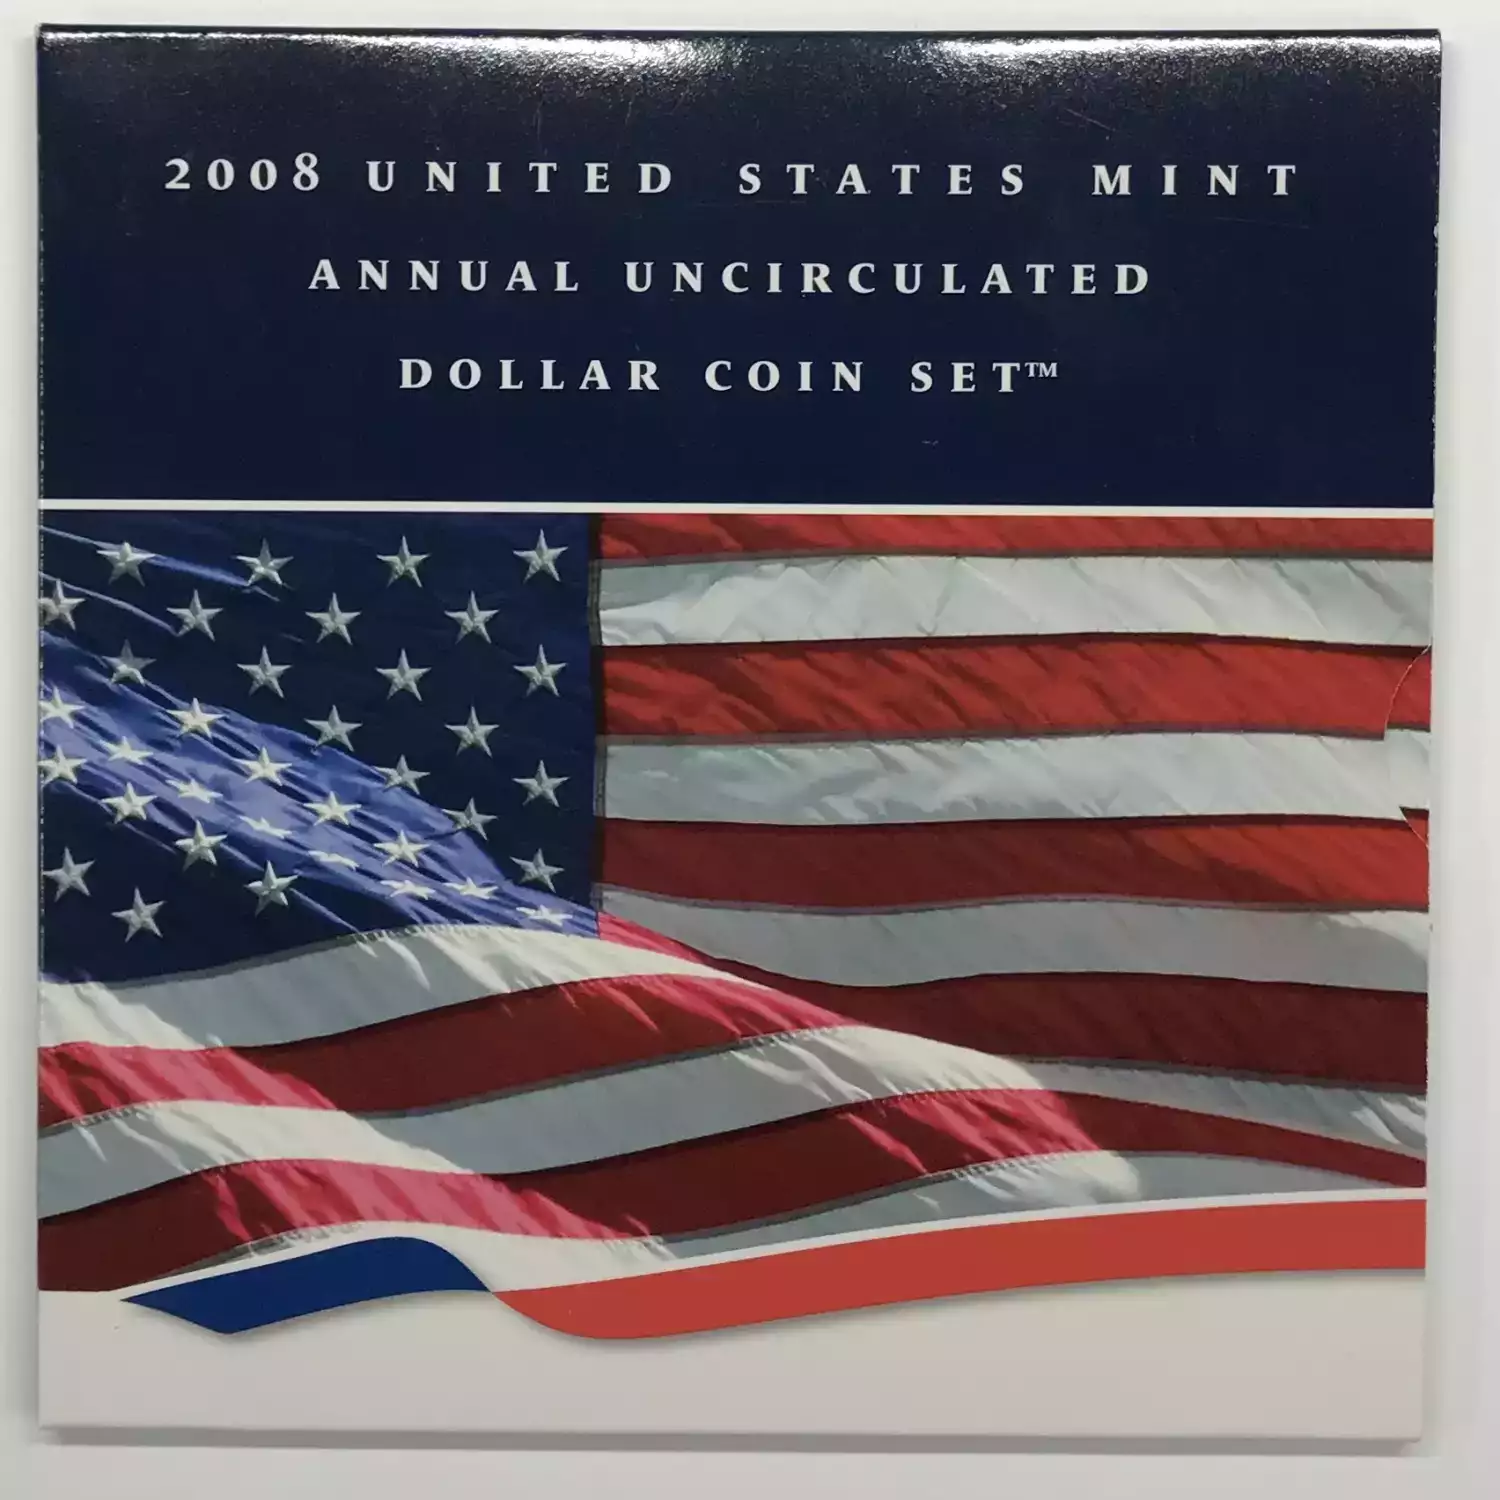 2008 Annual Uncirculated Dollar Coin Set incl W Burnished Silver Eagle - US Mint (4)